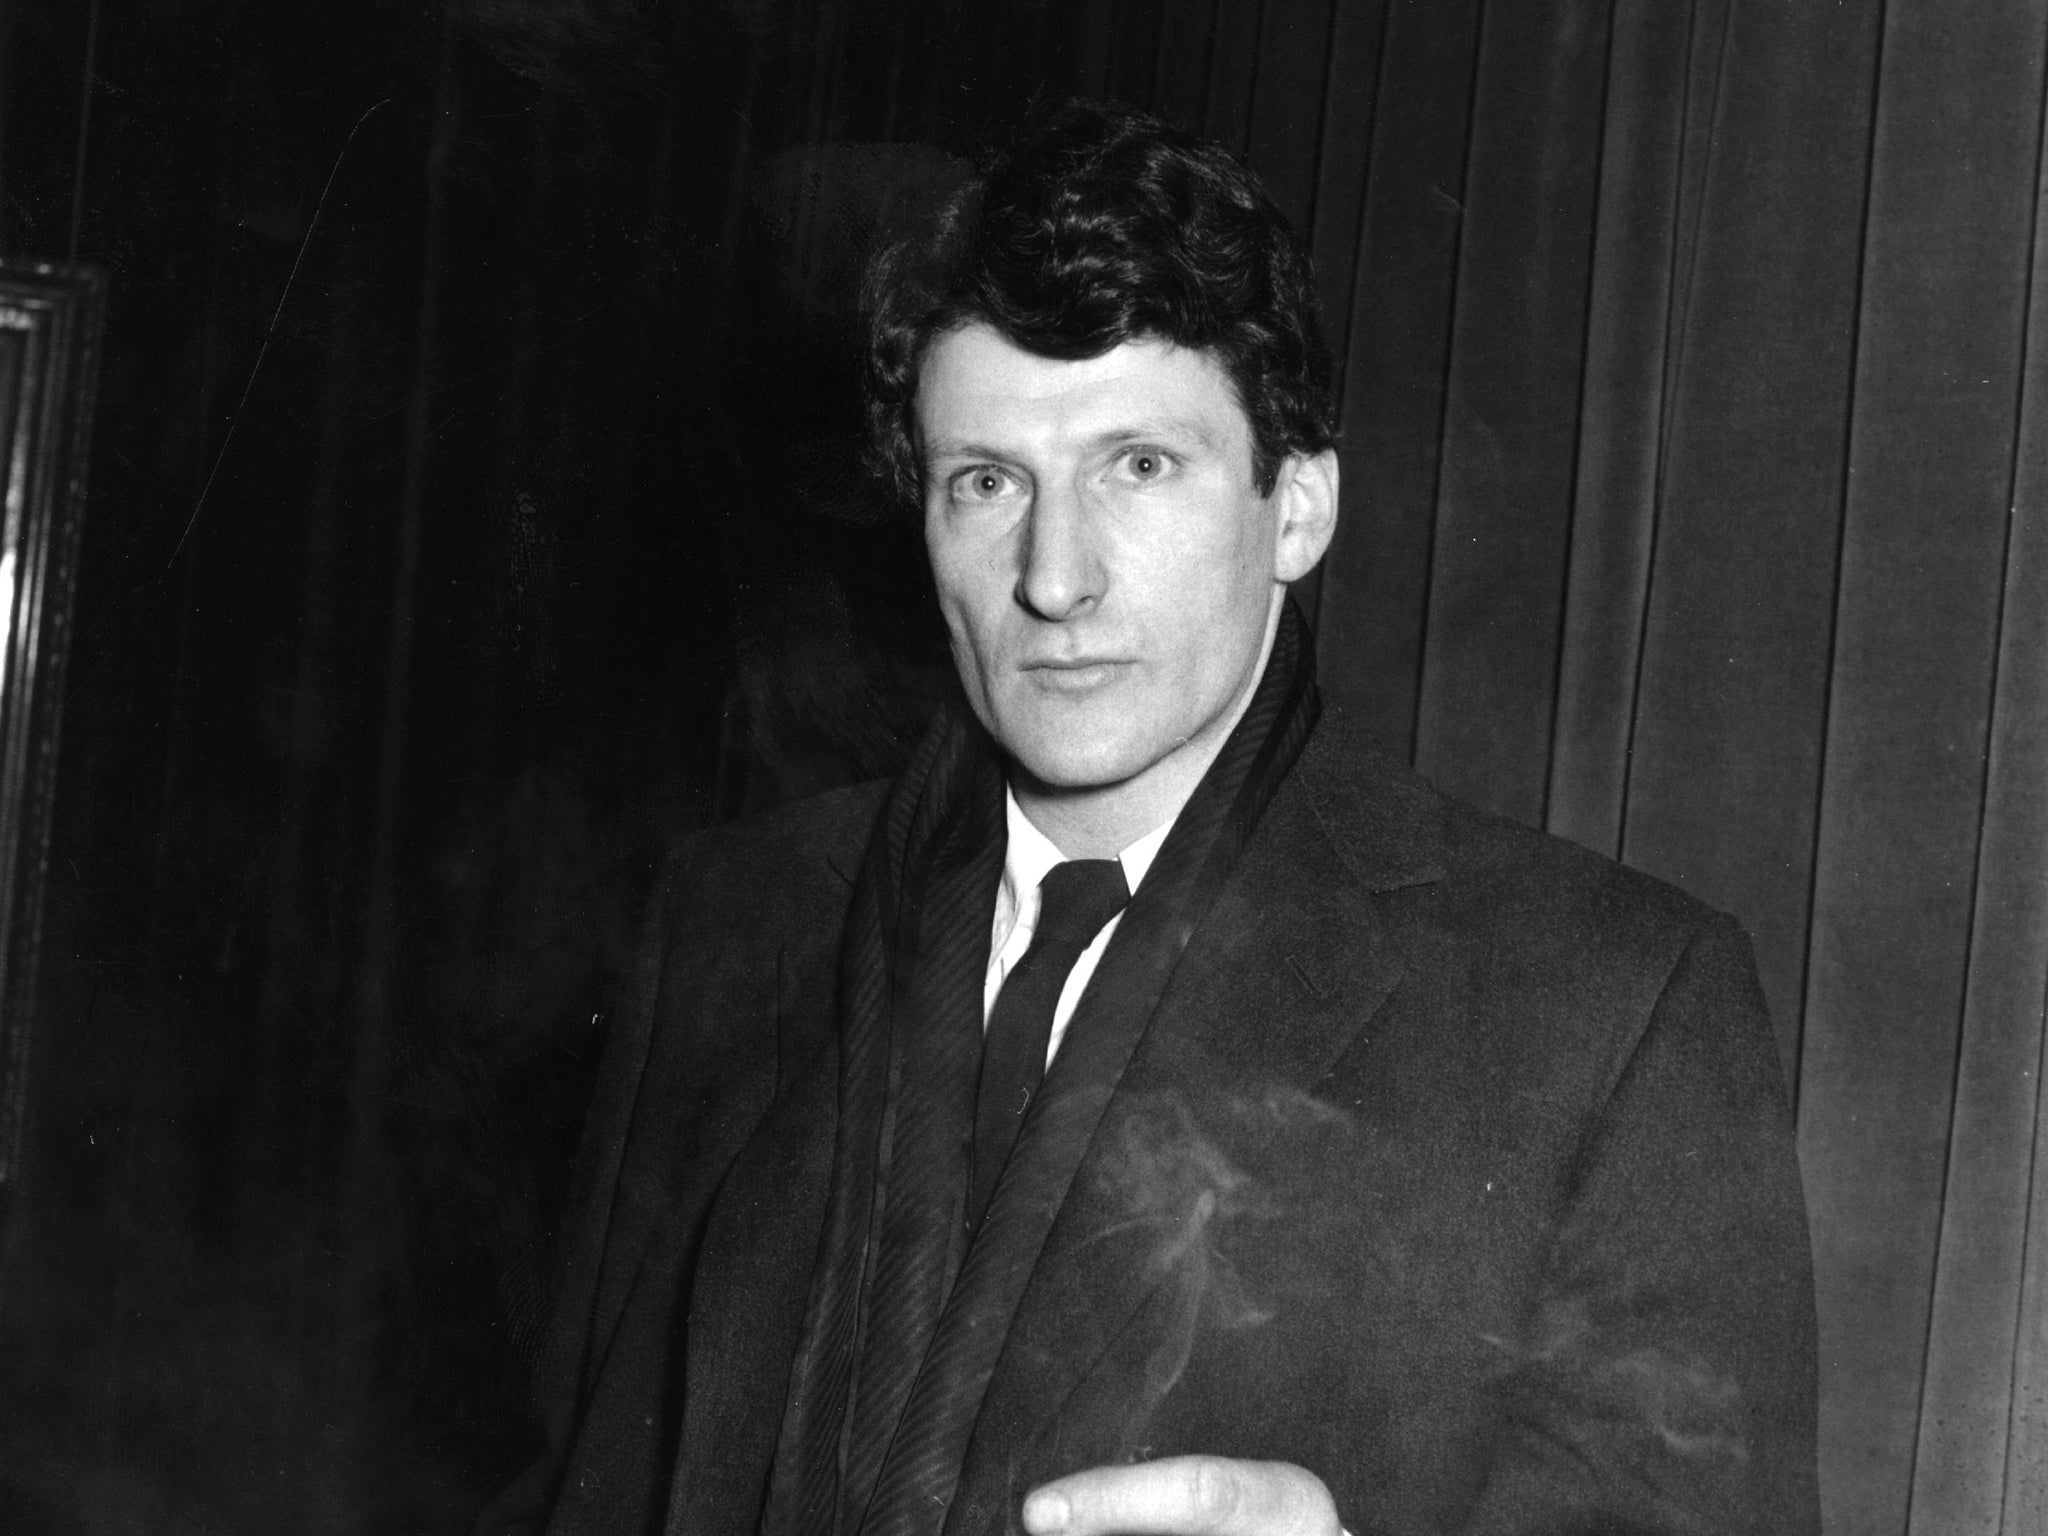 The most celebrated British figurative painter Lucien Freud